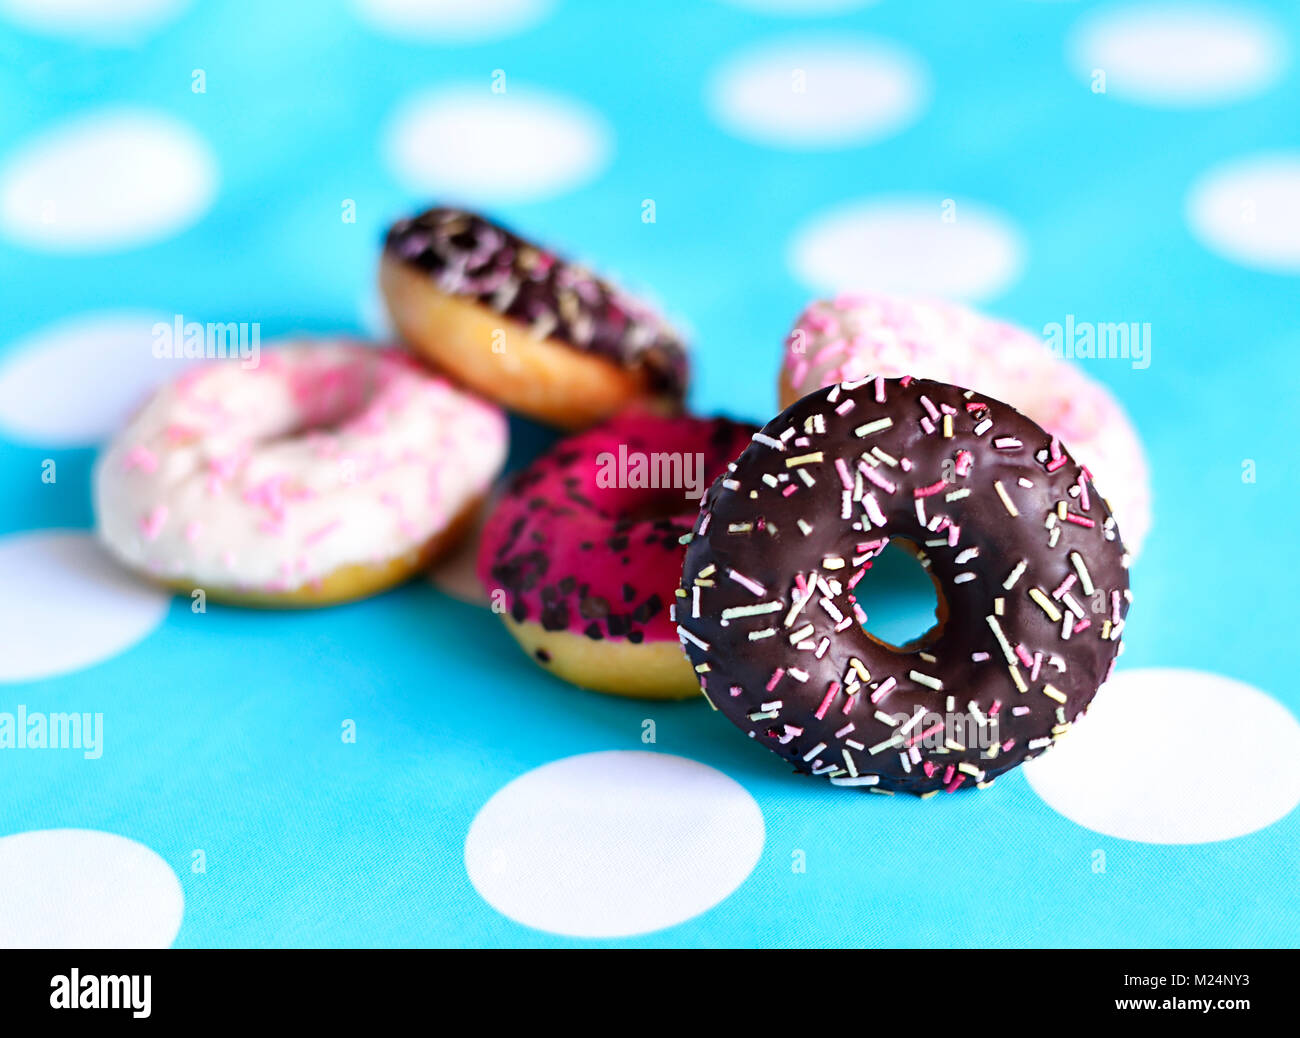 Delicious chocolate donuts with various glaze or icing and sprinkles. fresh donuts on a dotter background, sweet food or unhealthy eating scene. Stock Photo